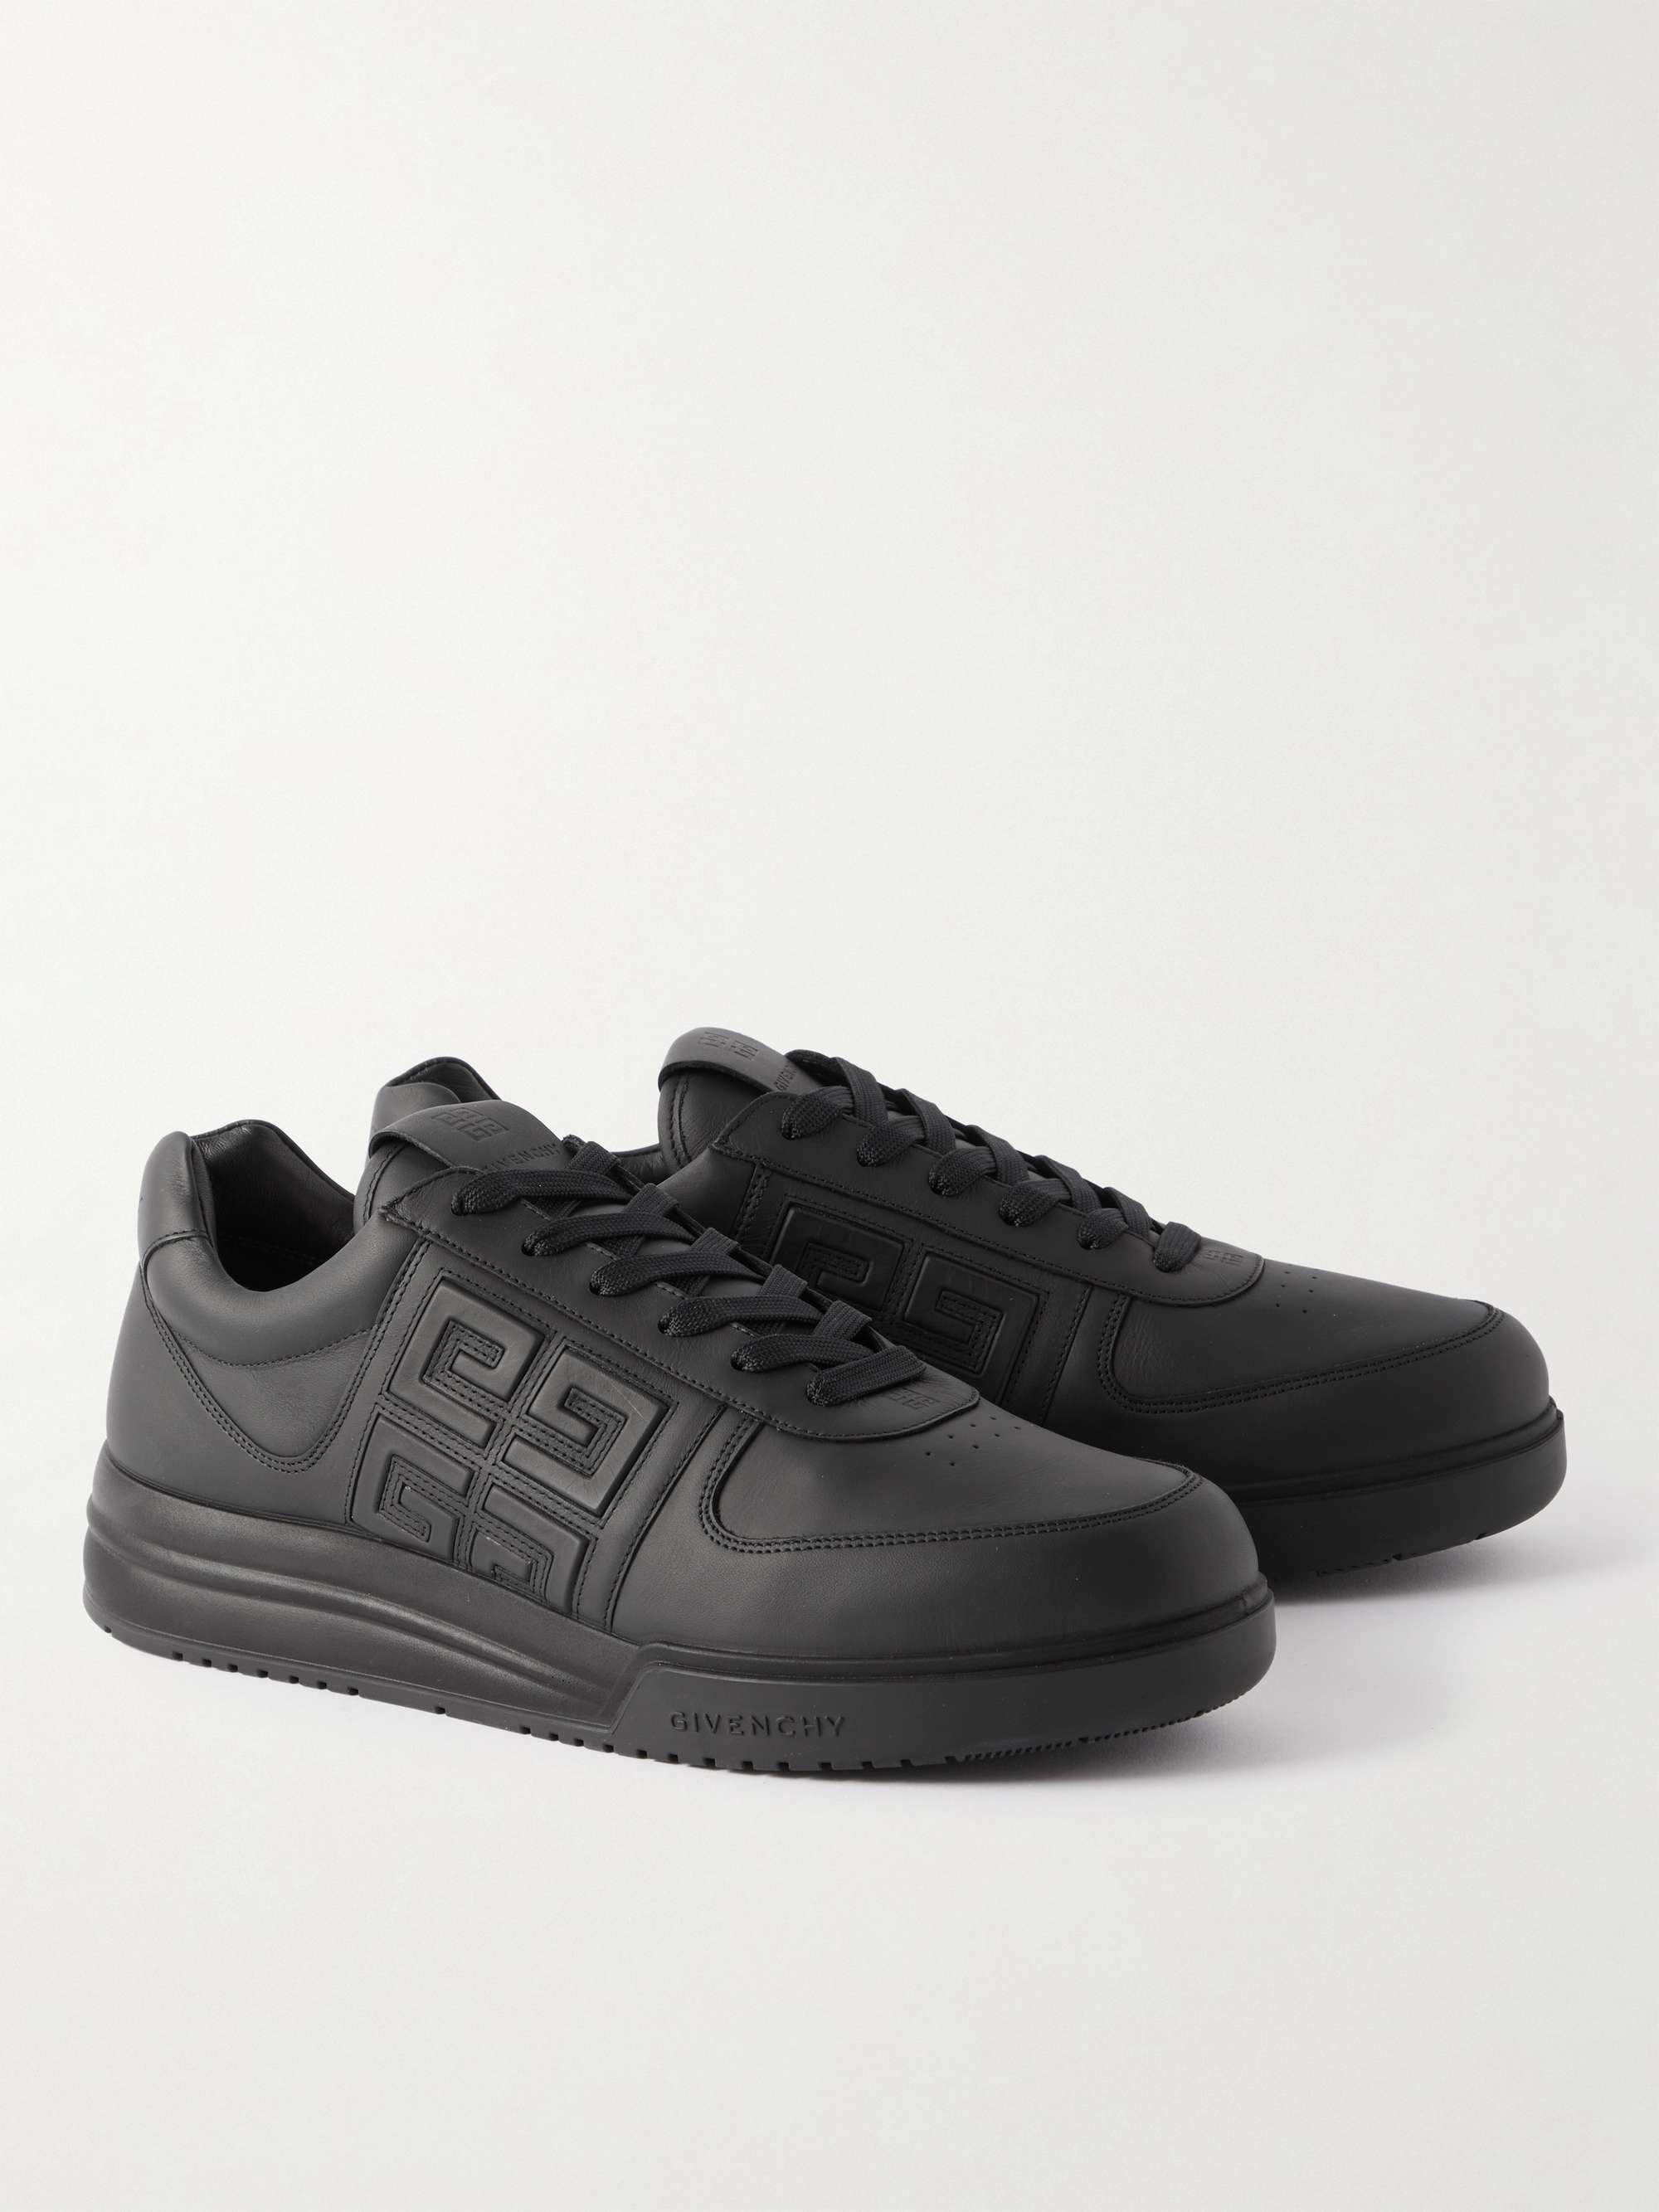 GIVENCHY G4 Logo-Embossed Leather Sneakers